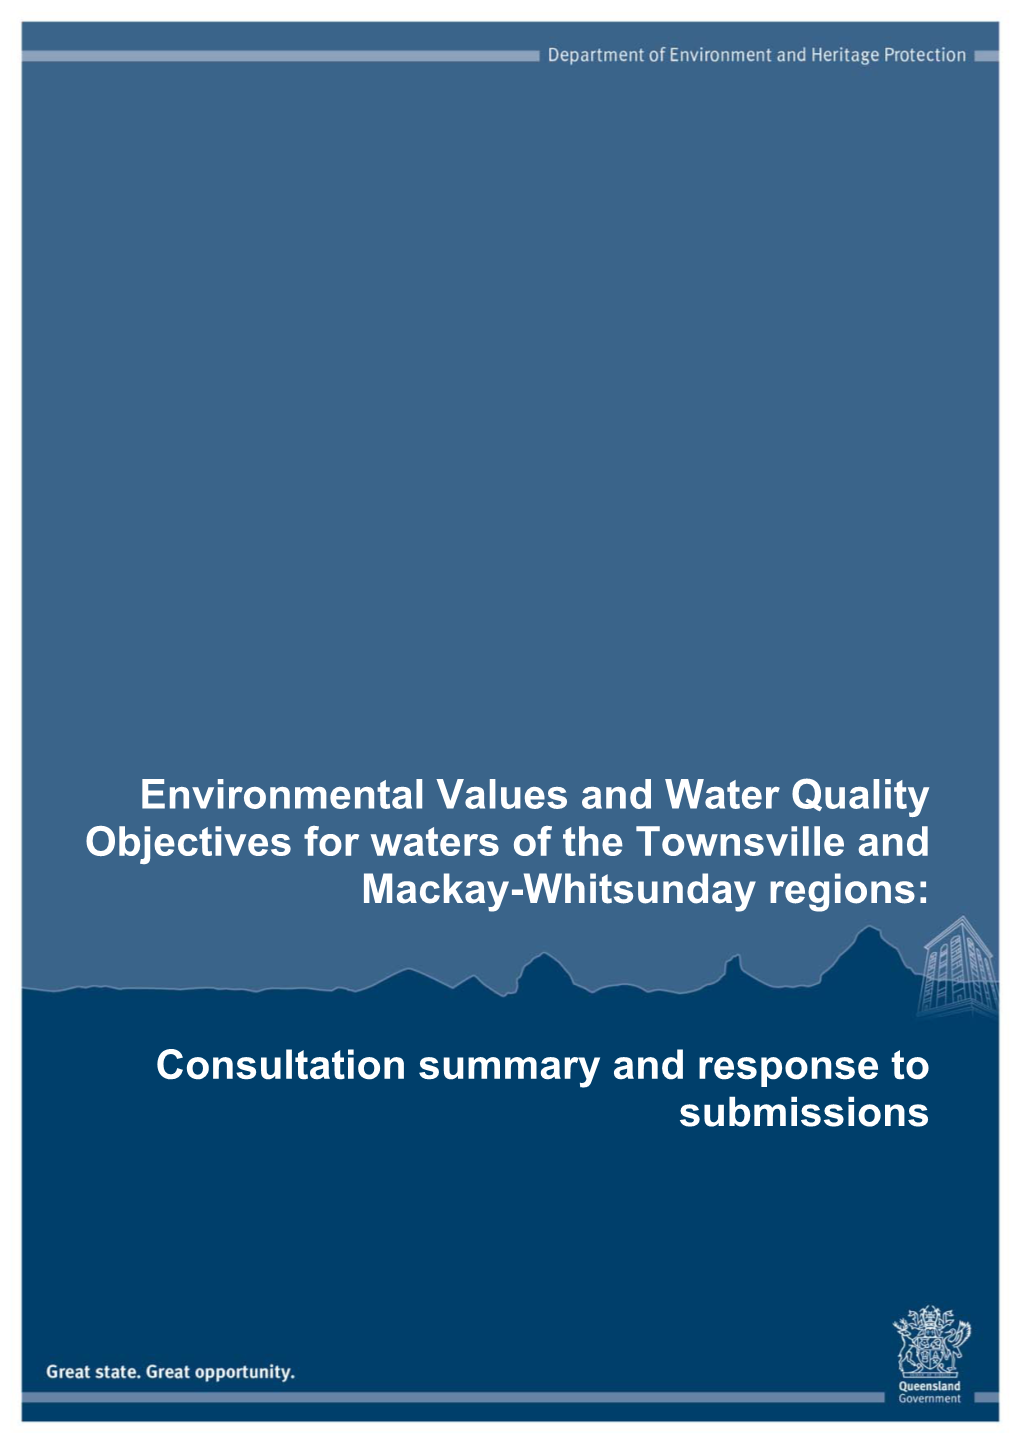 Environmental Values and Water Quality Objectives for Waters of the Townsville and Mackay-Whitsunday Regions